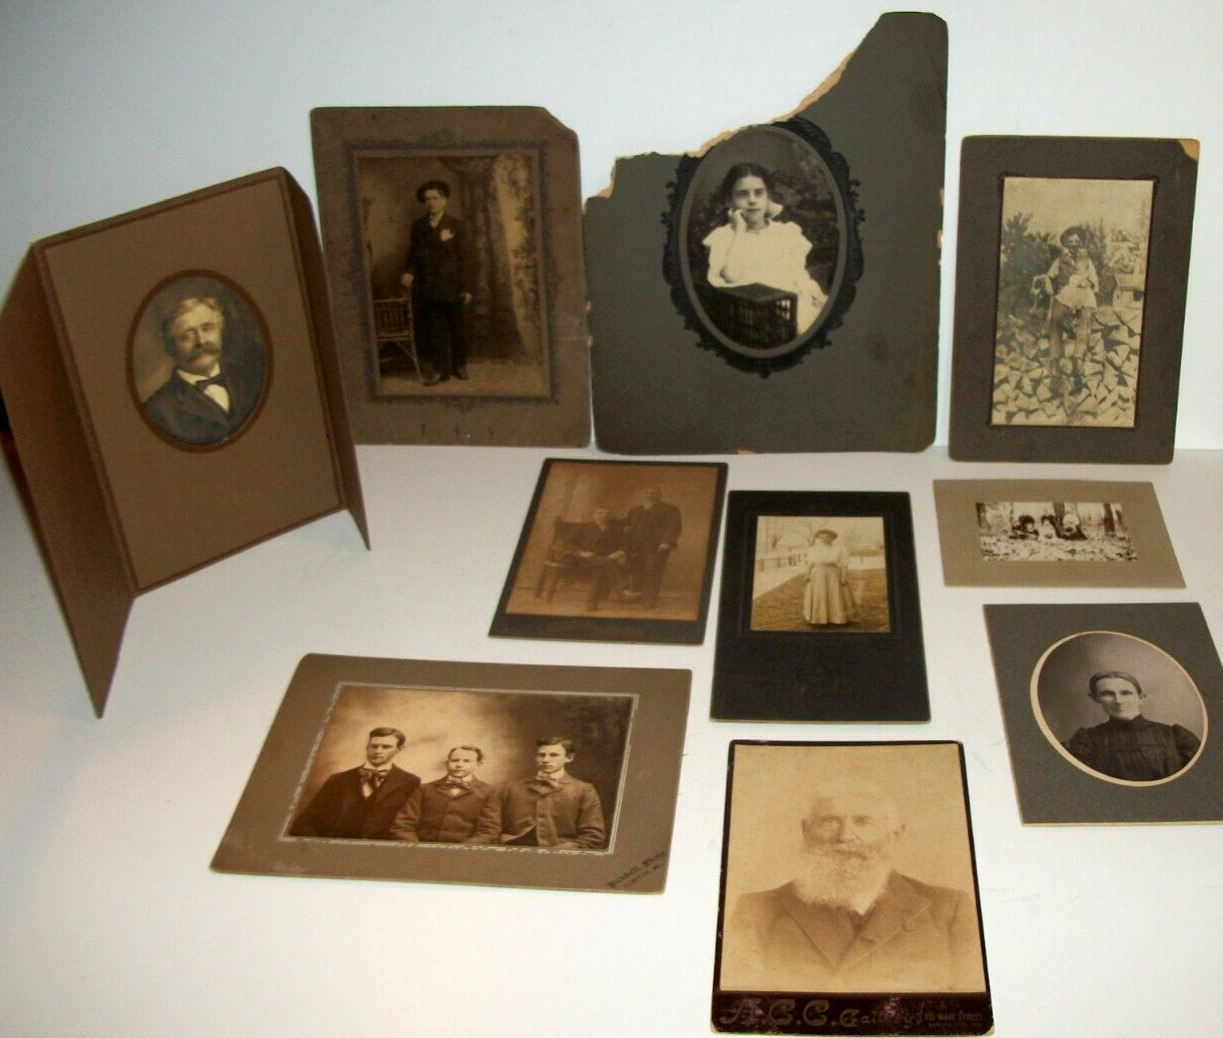 Lot of 10 TEN Antique Black and White Portrait Photo Photograph Framed Cardboard